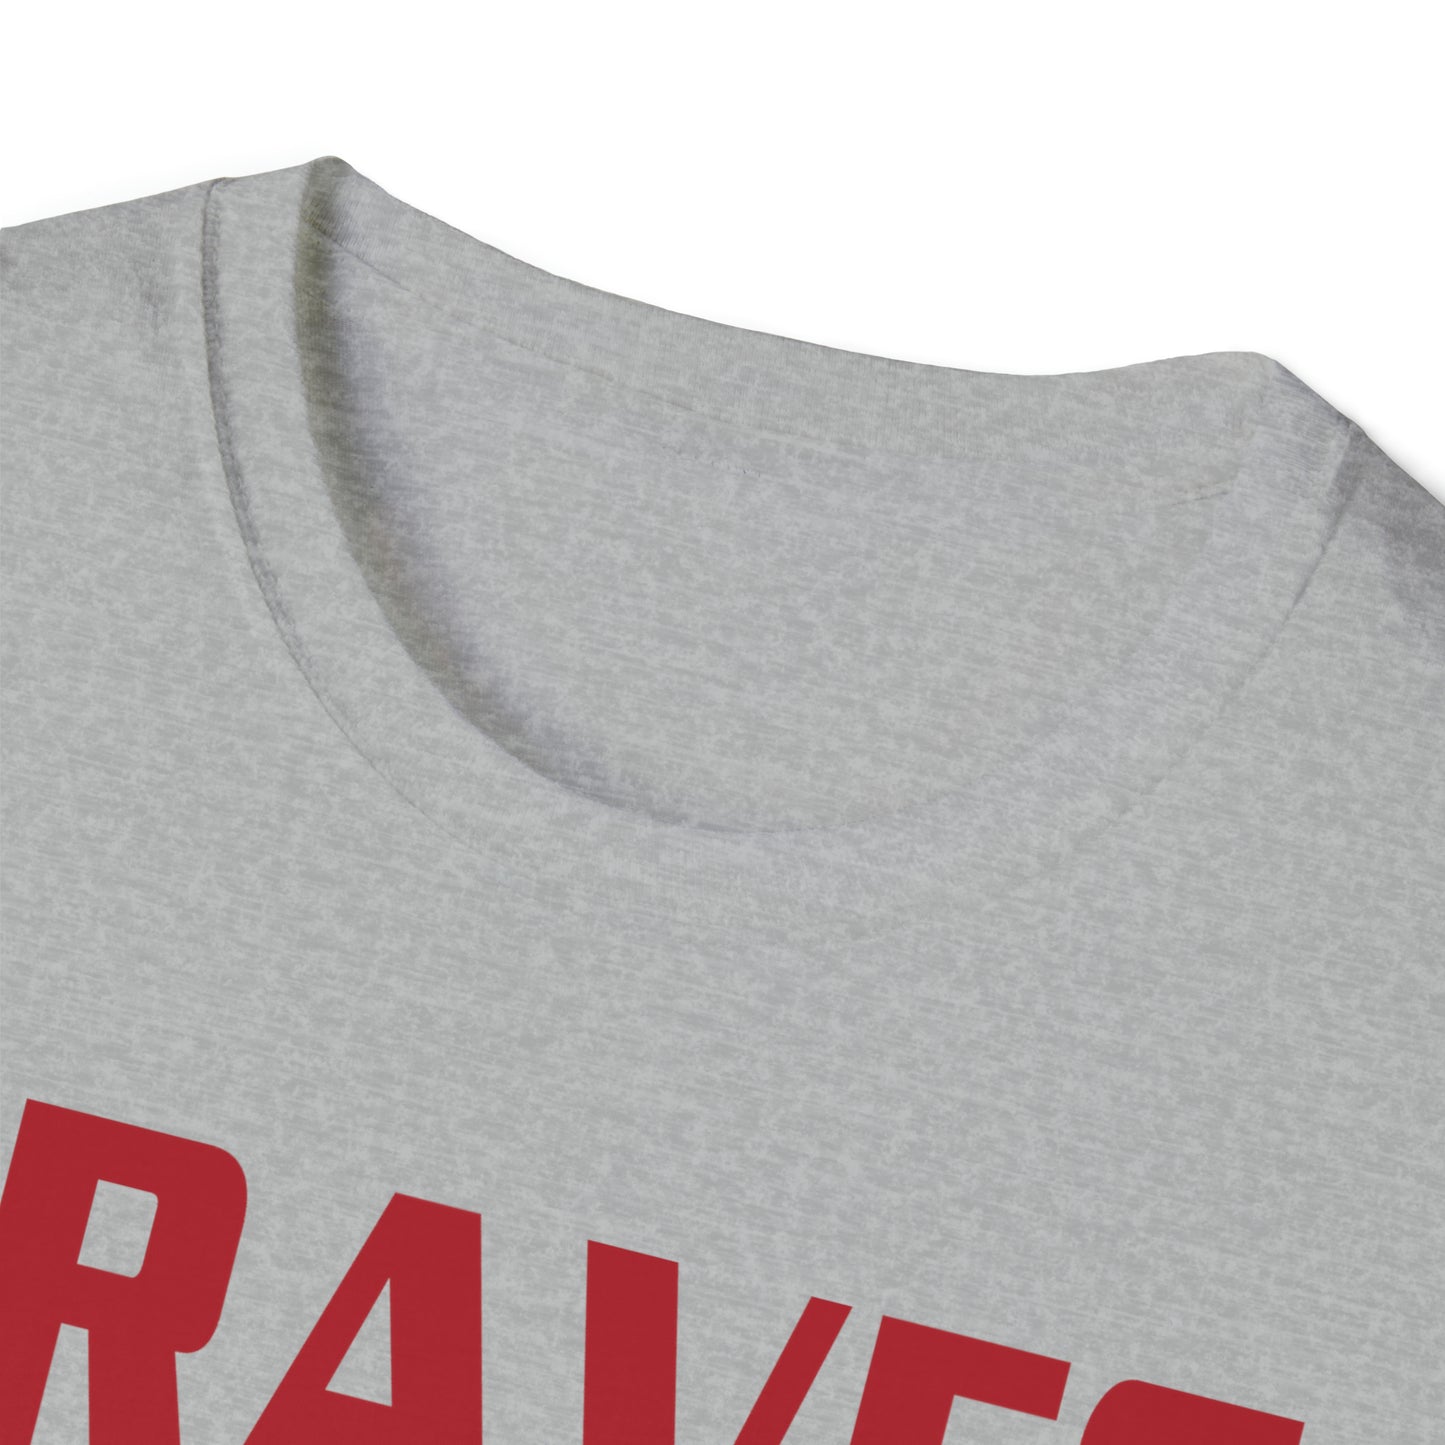 Braves Repeat Unisex Softstyle T-Shirt